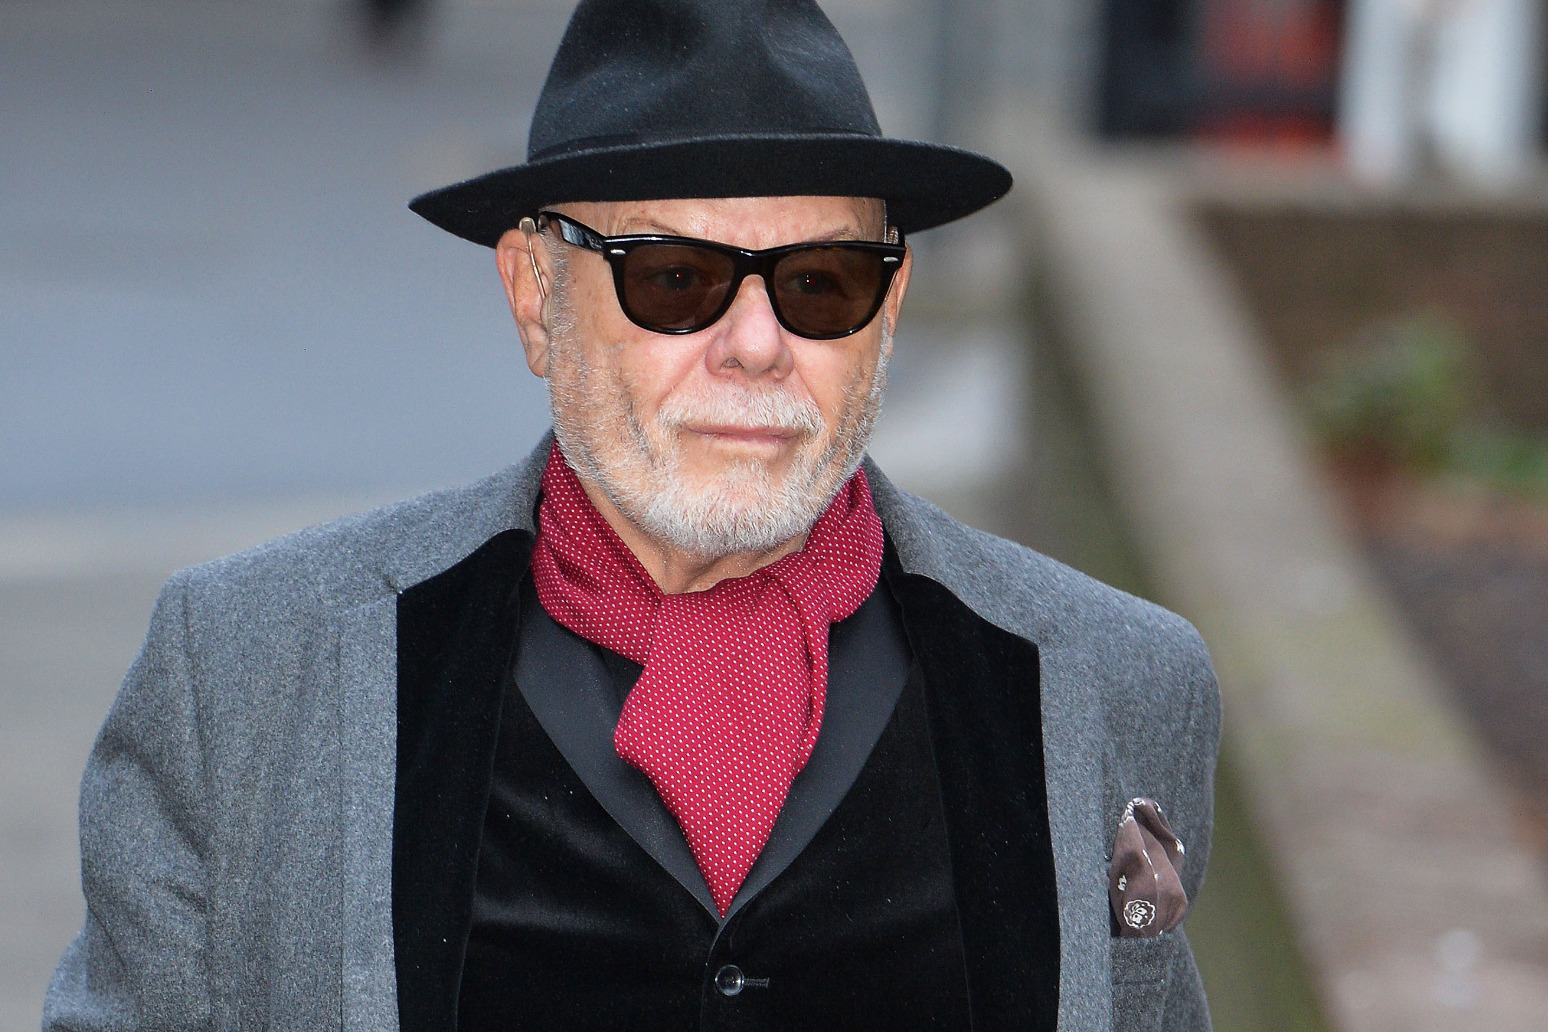 Gary Glitter returned to custody after breaching licence conditions 